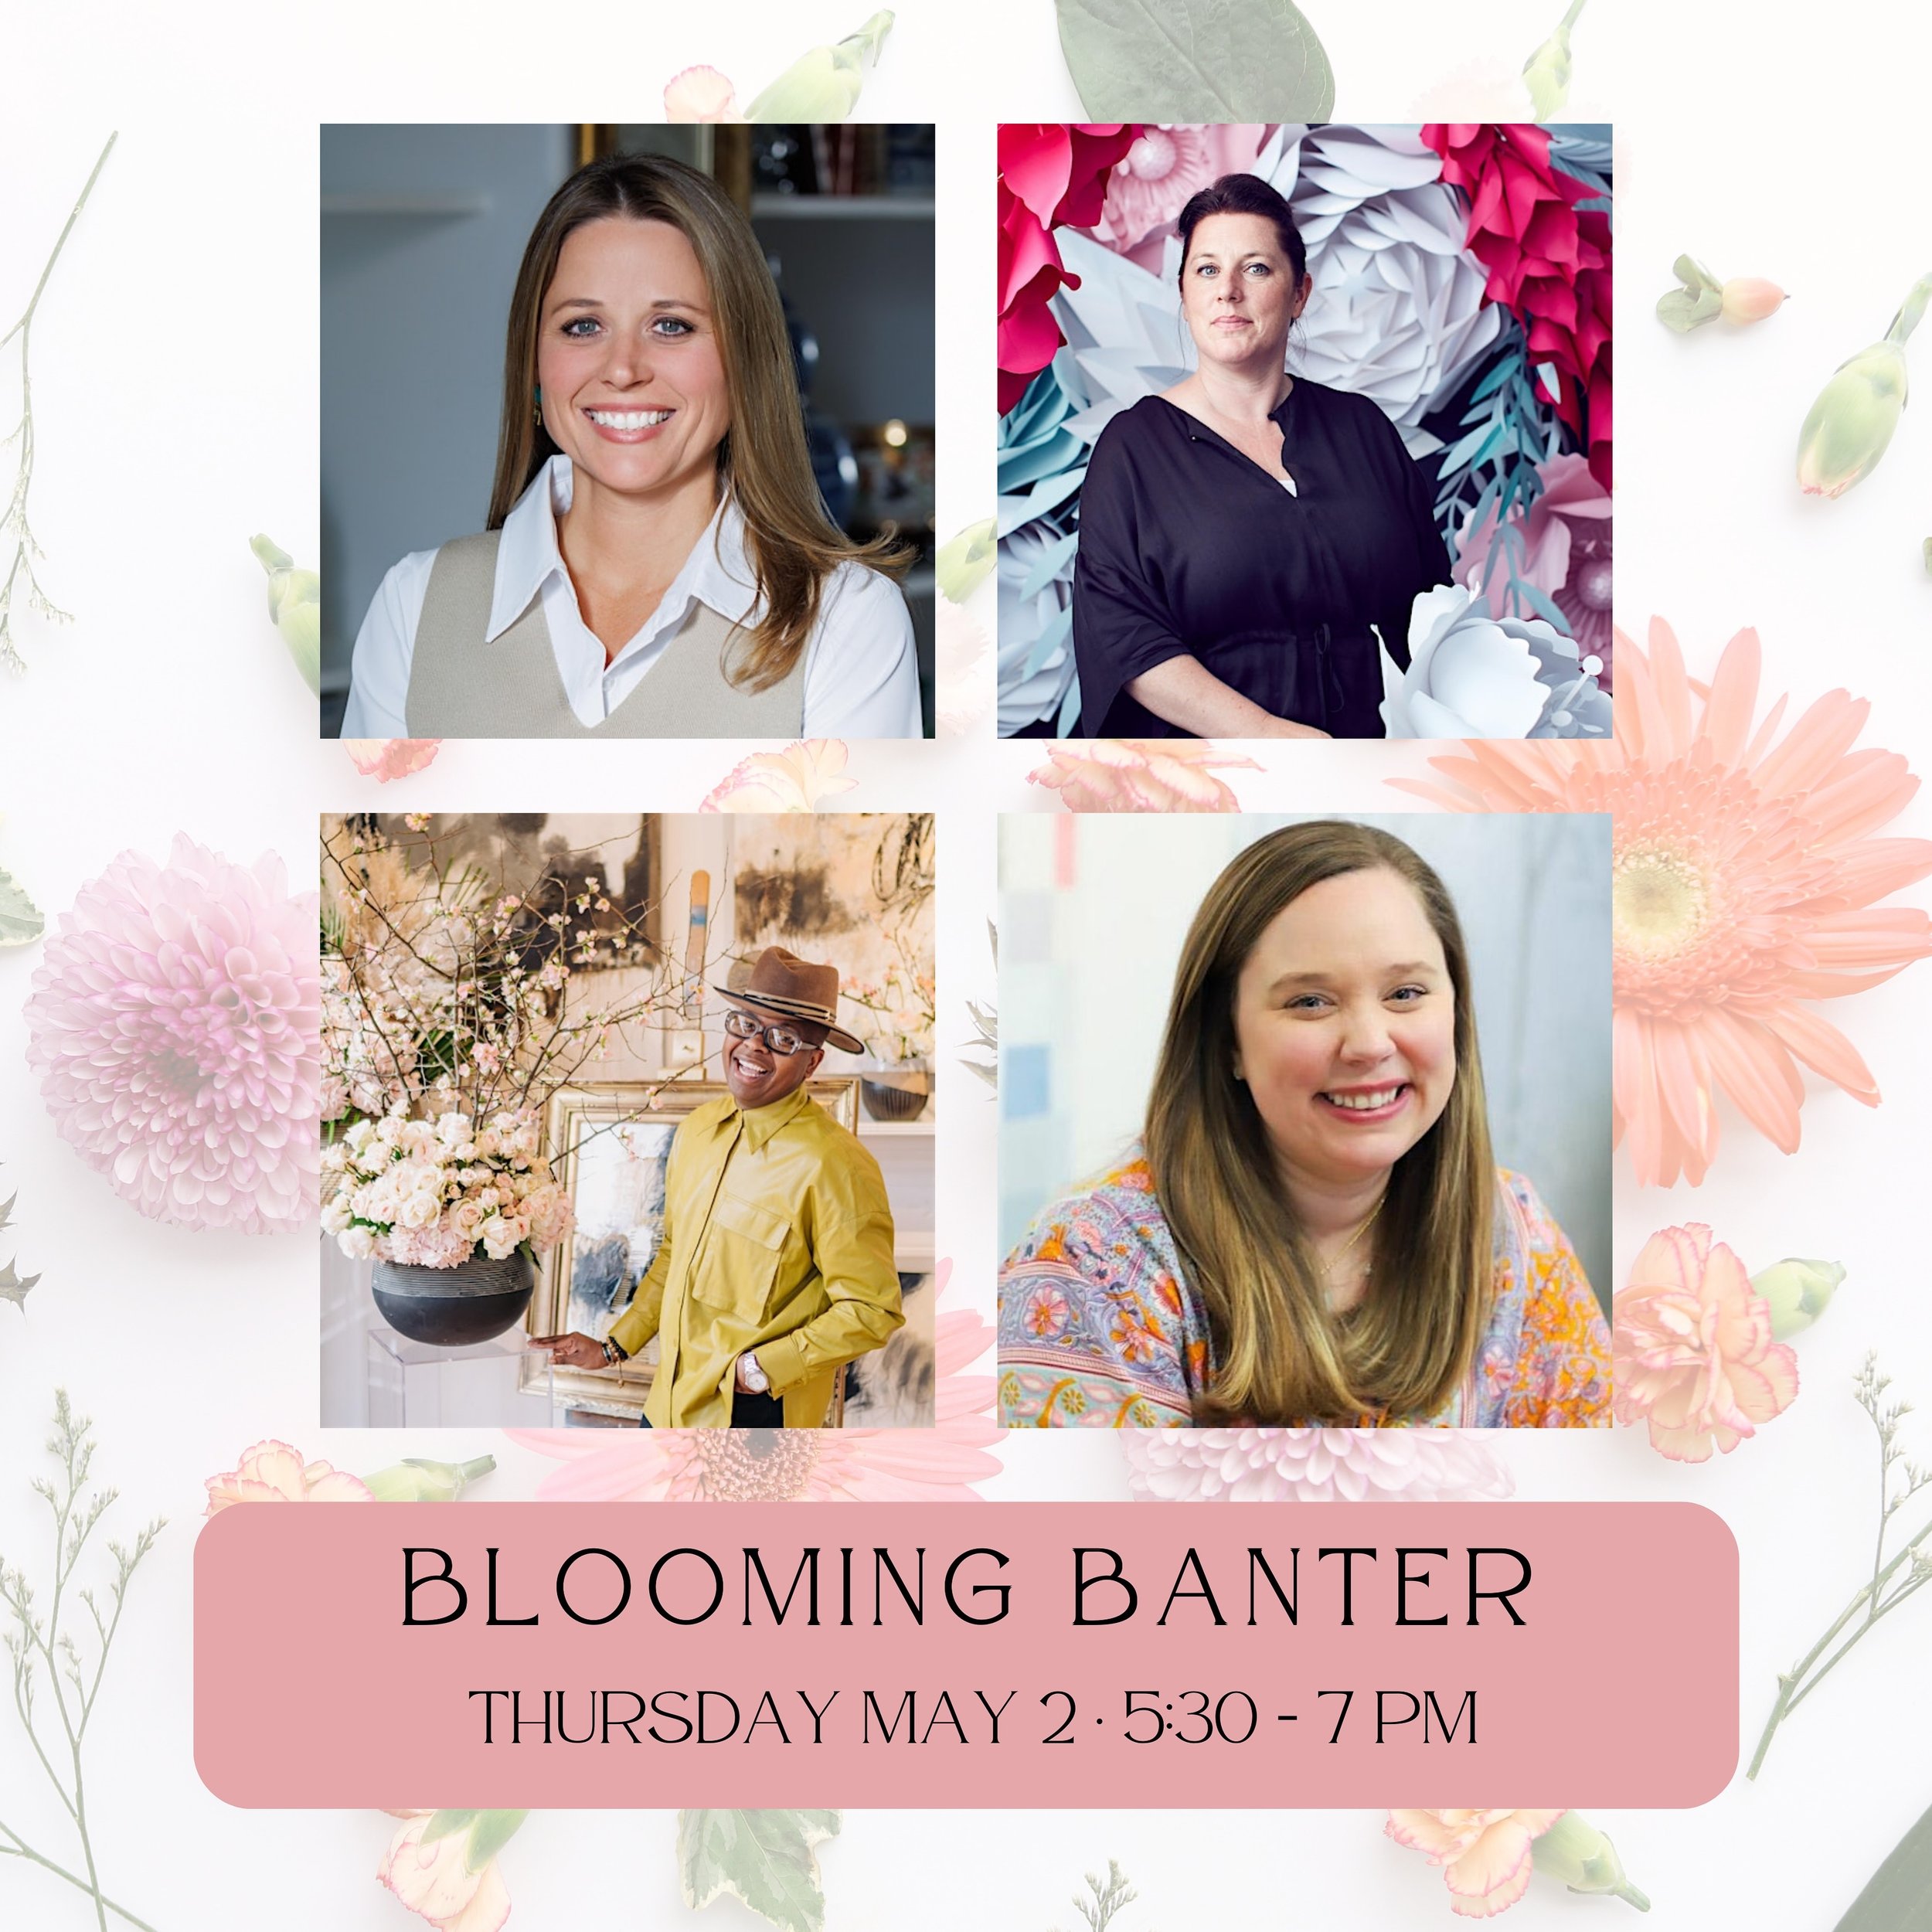 We invite you to join us this Thursday for an evening filled with great conversation, wine, florals, and wonderful company.

To get your tickets check out the link in my bio.
&bull;
&bull;
&bull;
&bull;
#whitneydurhaminteriors #atlantainteriors #atla